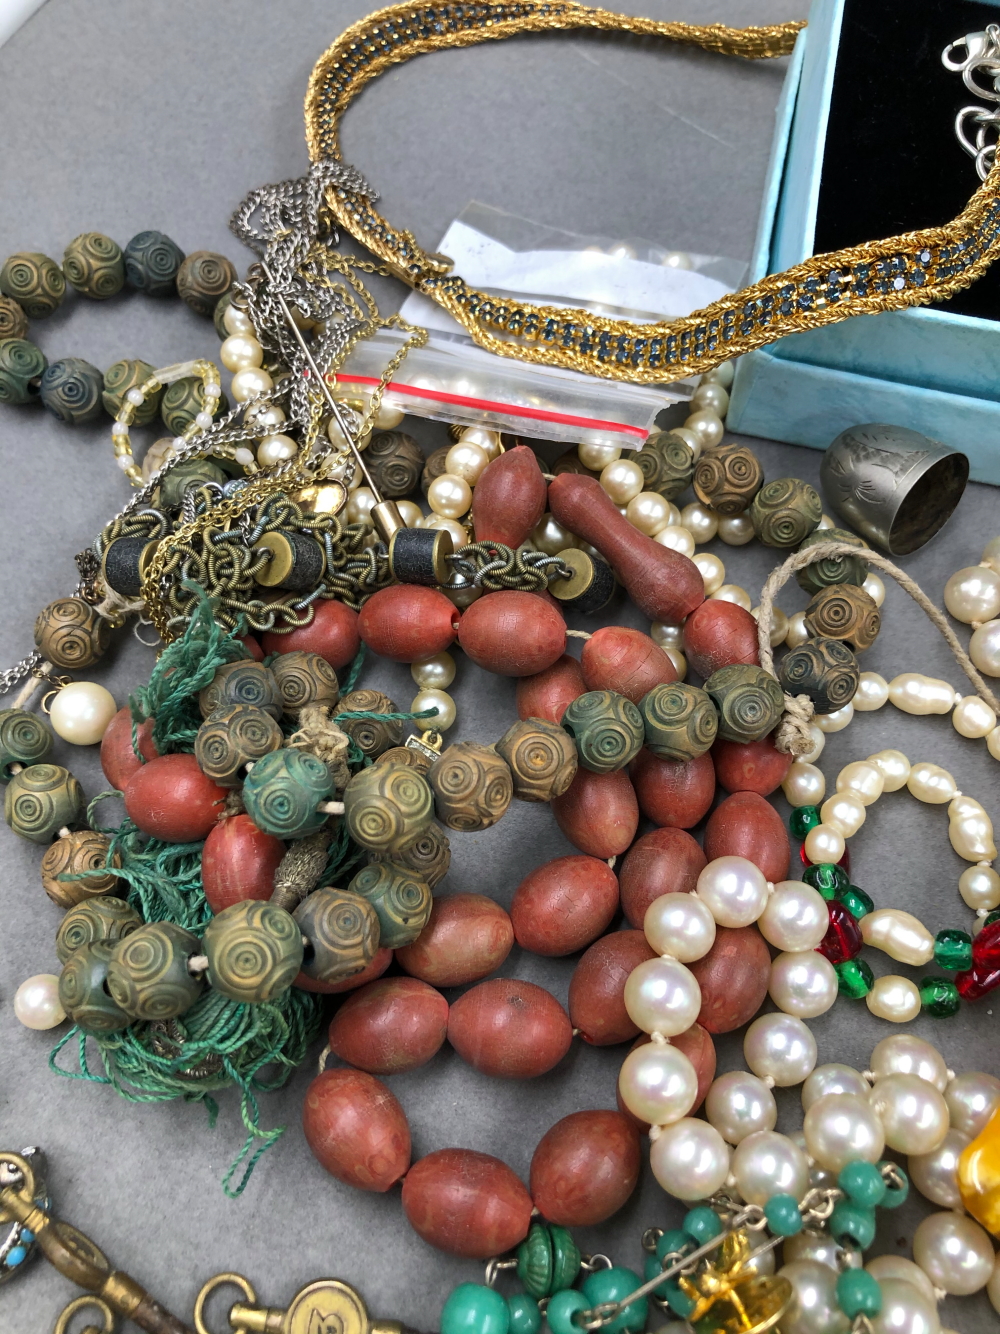 A QUANTITY OF JEWELLERY TO INCLUDE SILVER, COSTUME, BEADS, PEARLS, WATCH KEYS, ETC. - Image 7 of 15